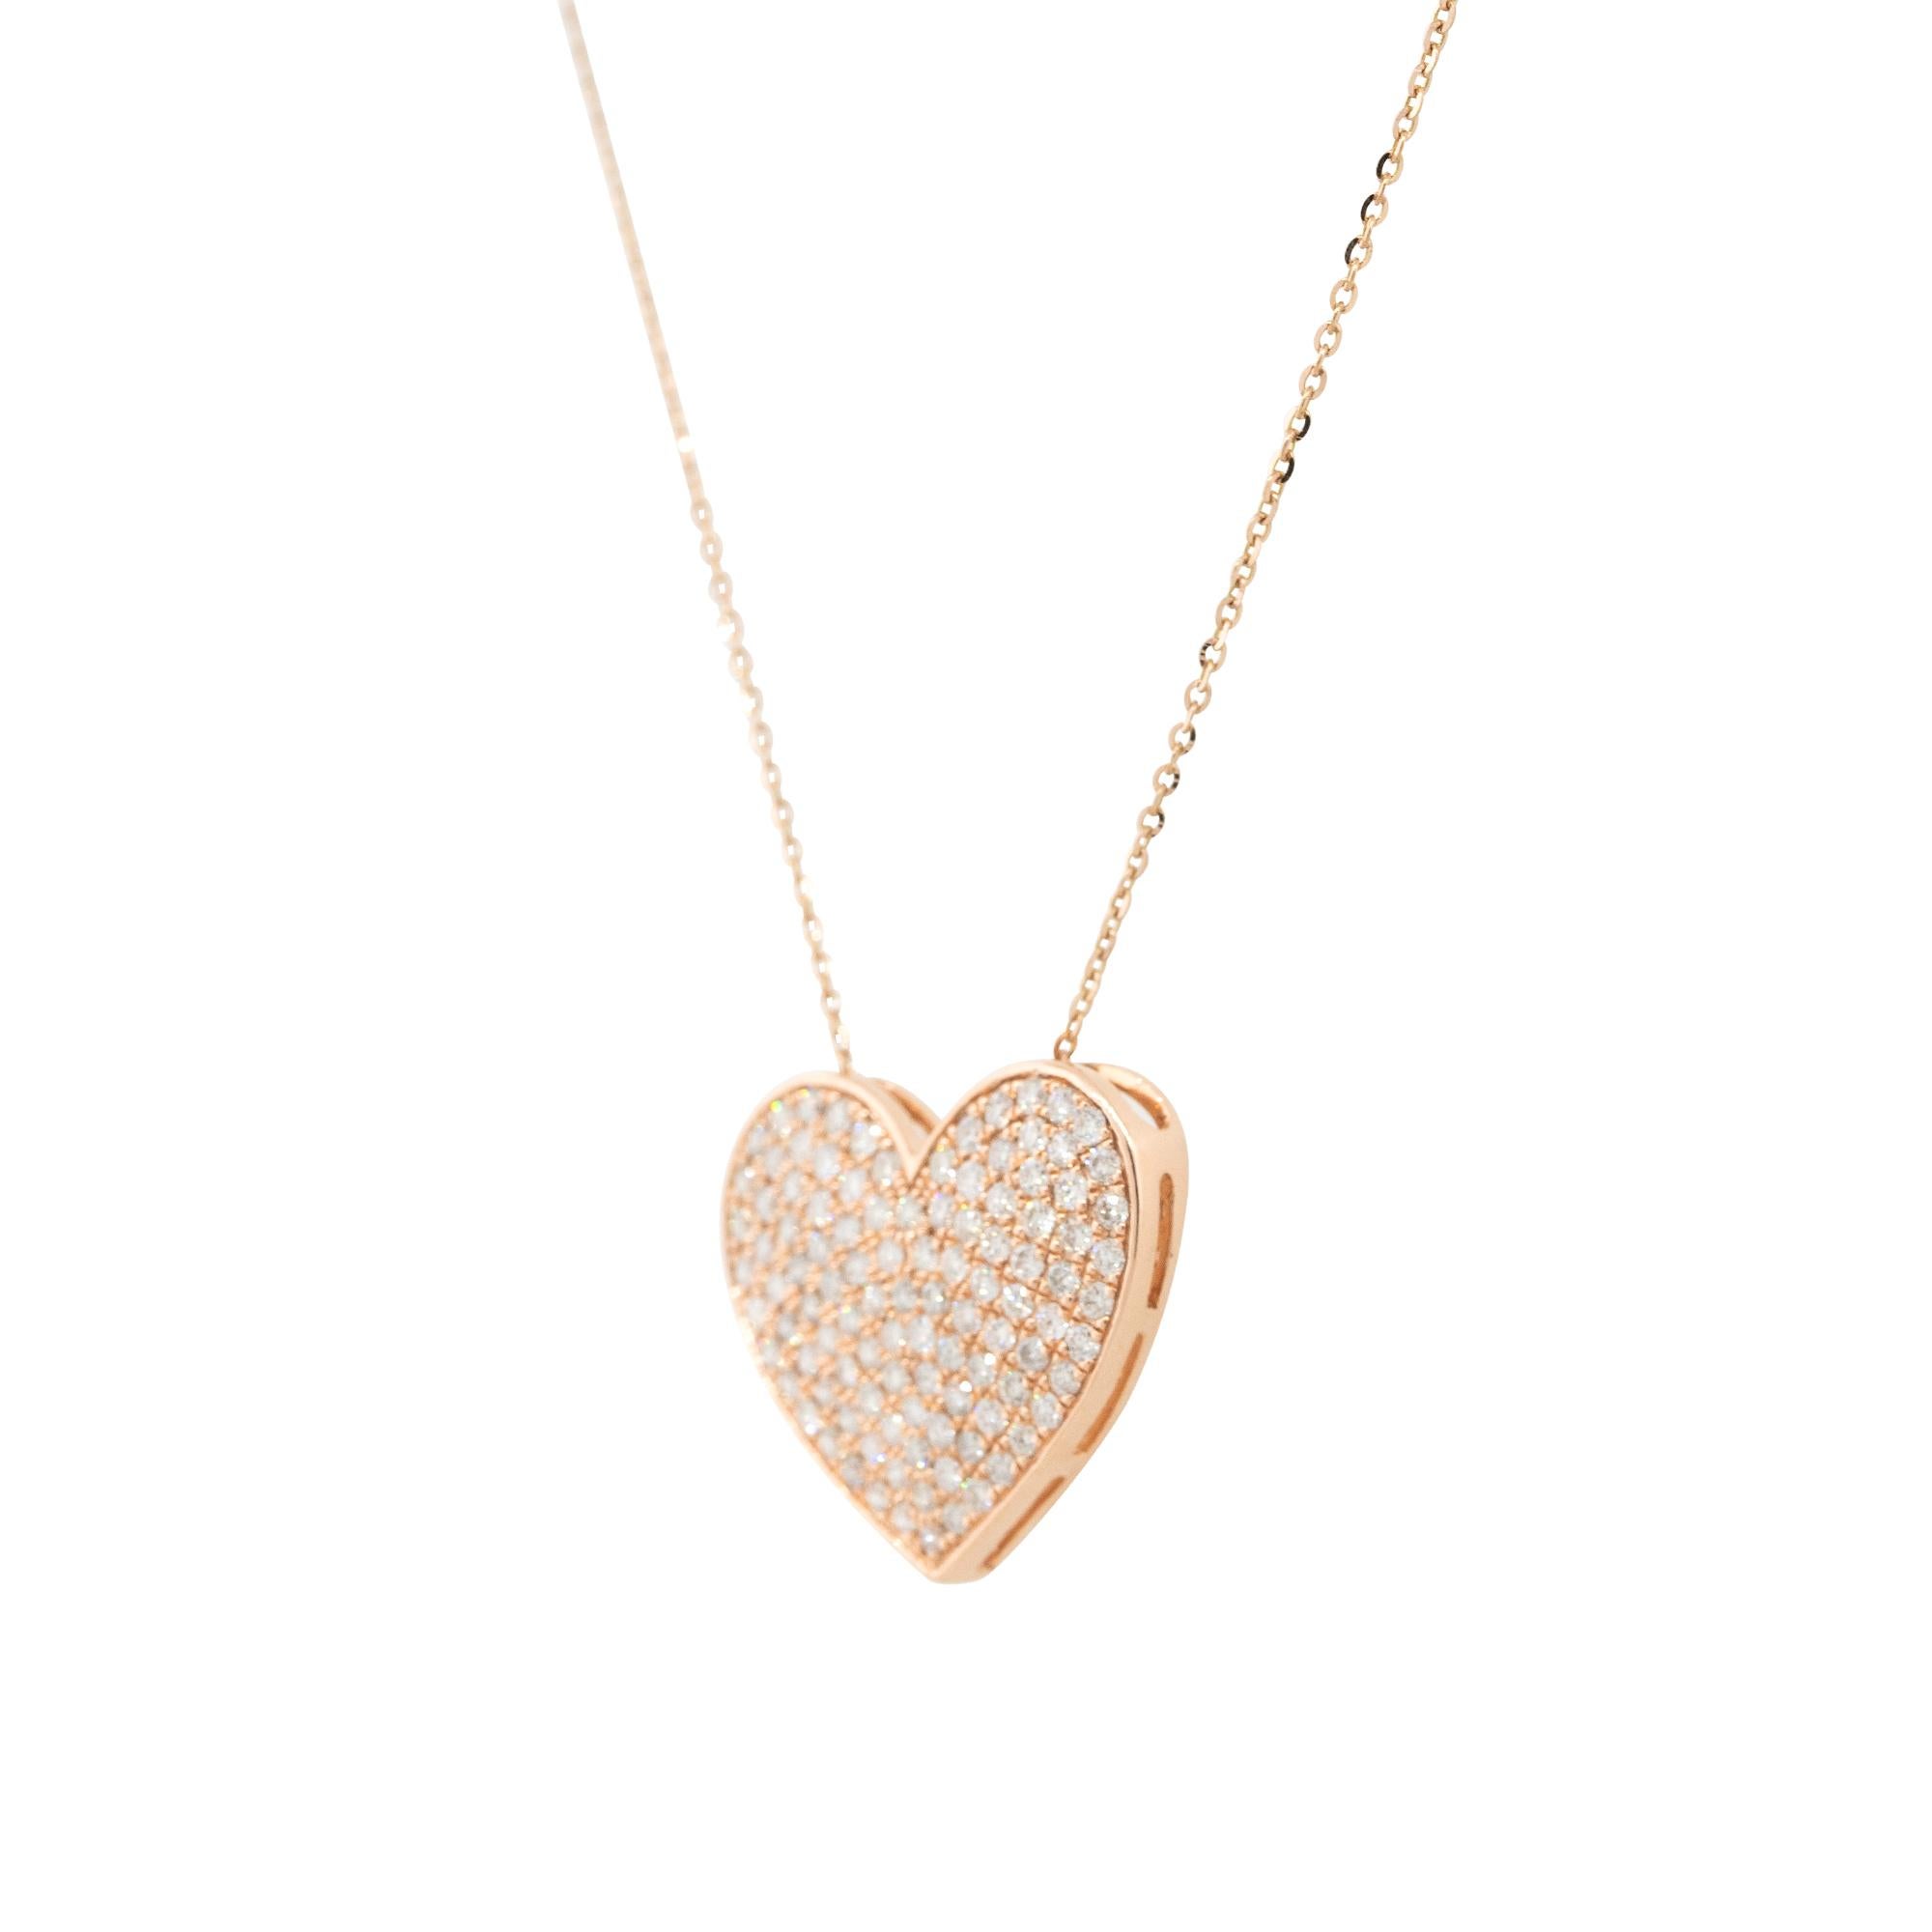 14k Rose Gold 1.01ctw Pave Diamond Heart Pendant Necklace

Material: 14k Rose Gold
Diamond Details: Approximately 1.01ctw of Pave set Round Diamonds
Clasps: Spring Ring Clasp
Total Weight: 3.7g (2.4dwt)
Pendant Measurements: 20.73mm x 3.8mm x